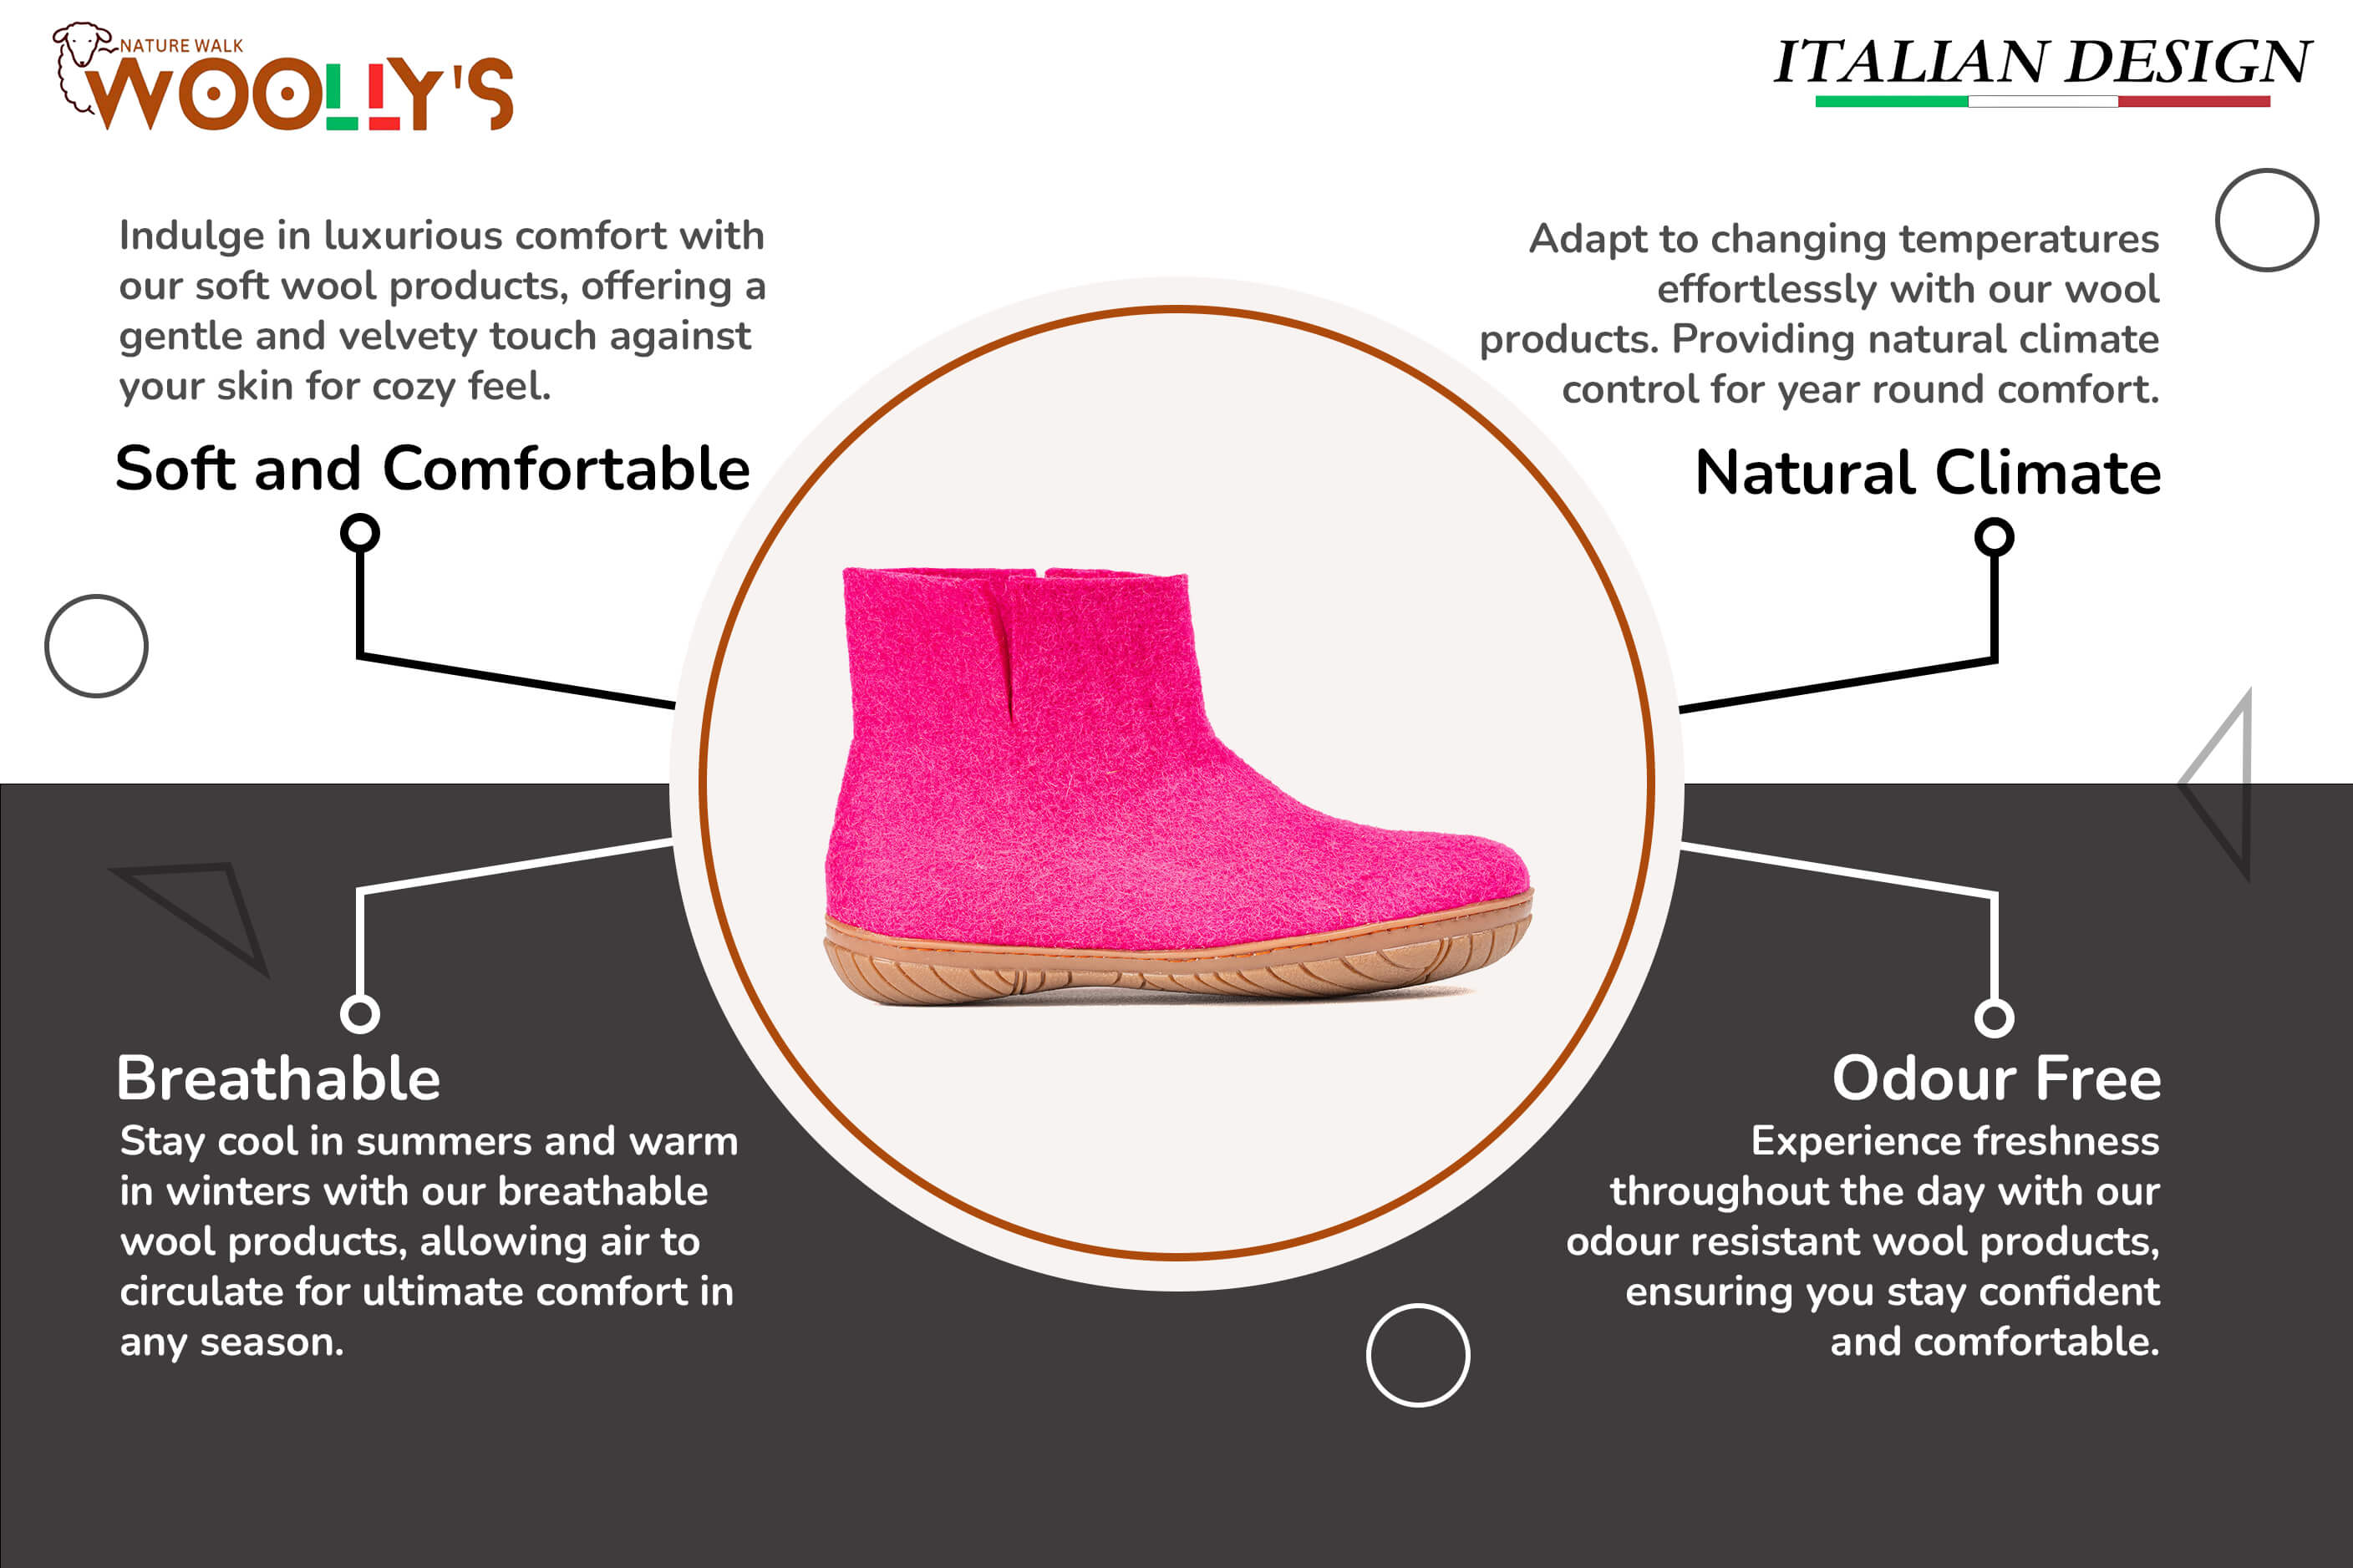 Outdoor Low Boots With Rubber Sole -Fuchsia